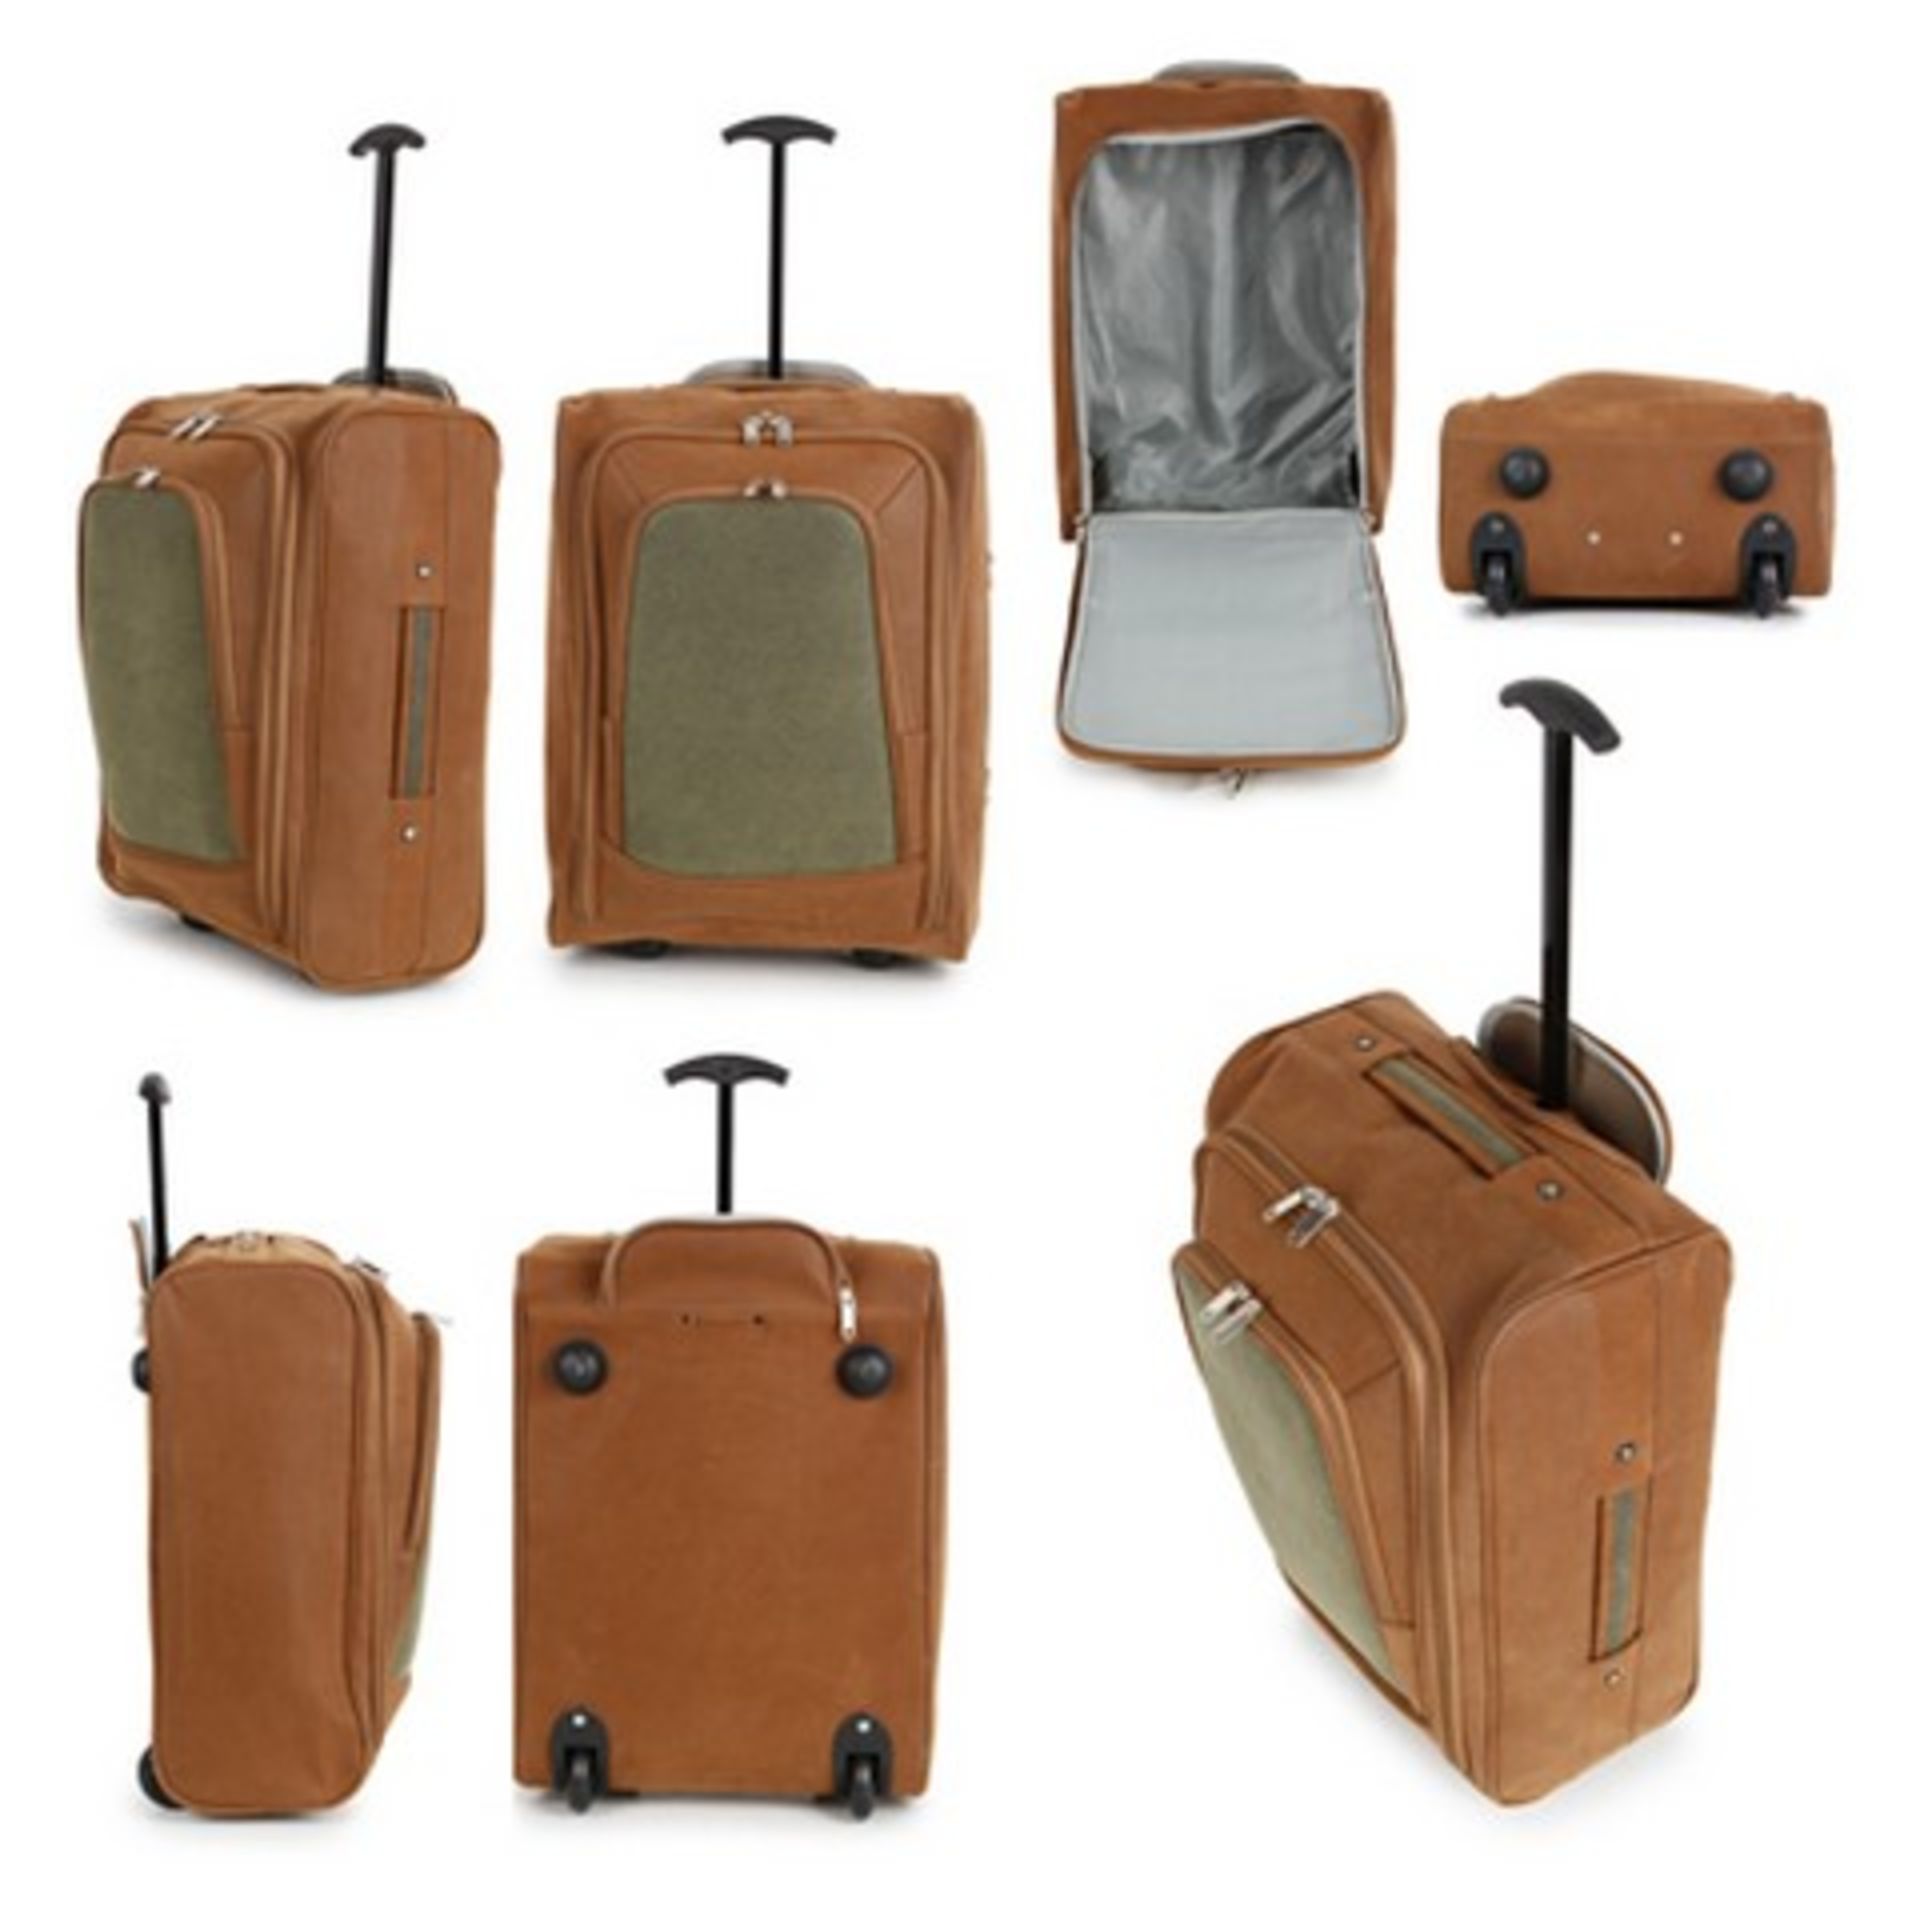 No VAT Brand New Cabinclass Trolley Suitcase - ISP £59.99 (Snazzy Luggage) - Hand Luggage Size (